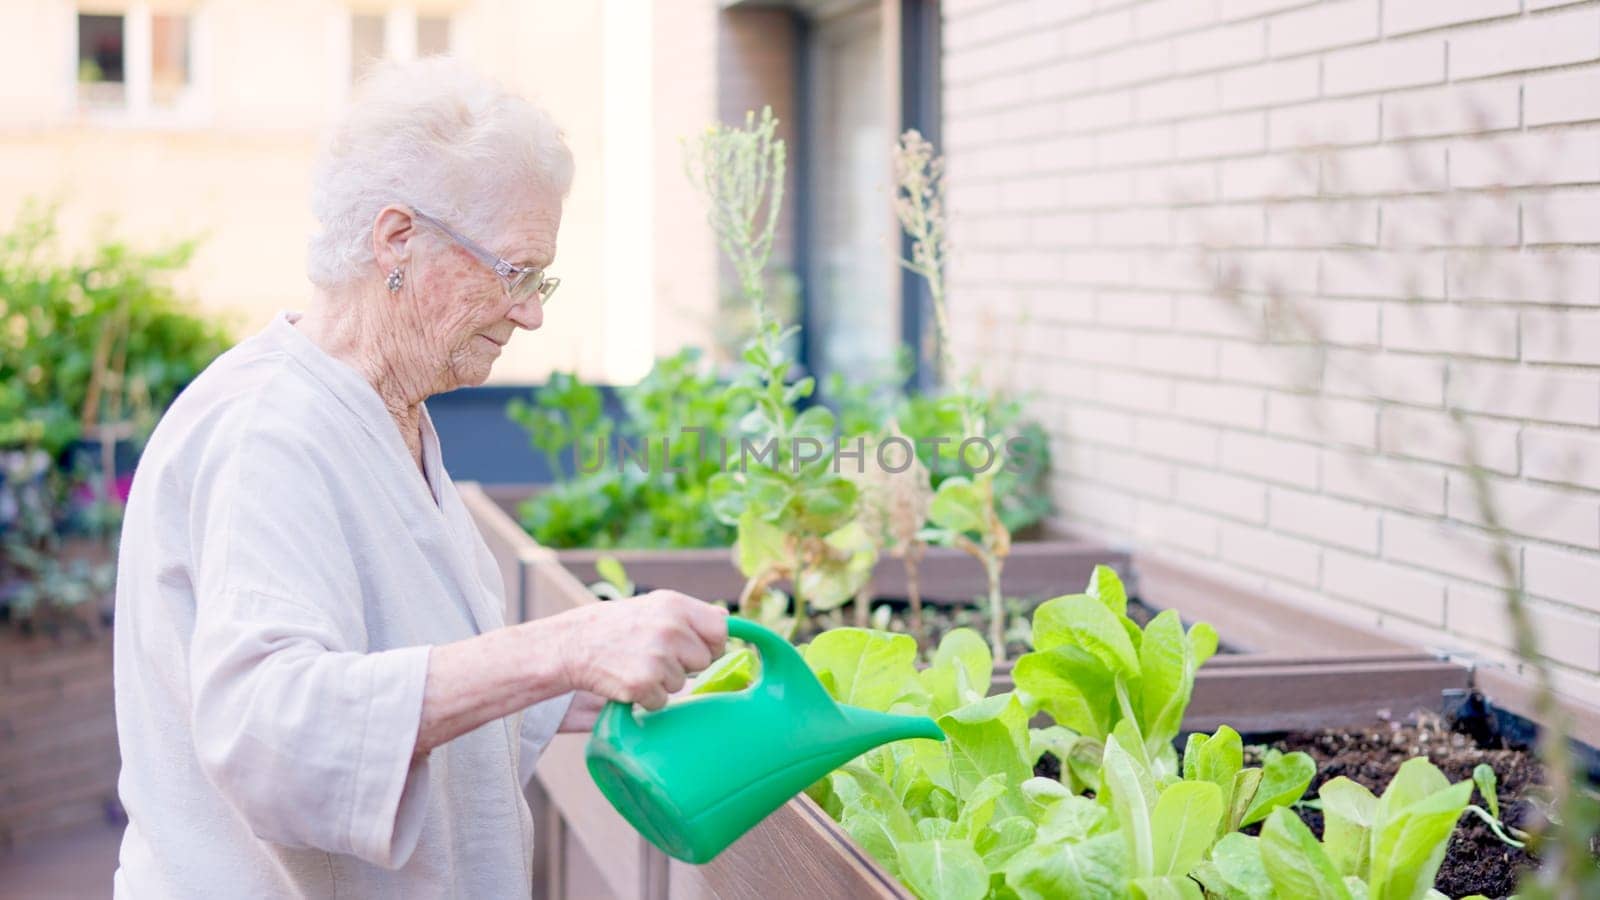 Video of a senior woman watering plants and a caregiver approaching to her in a geriatric